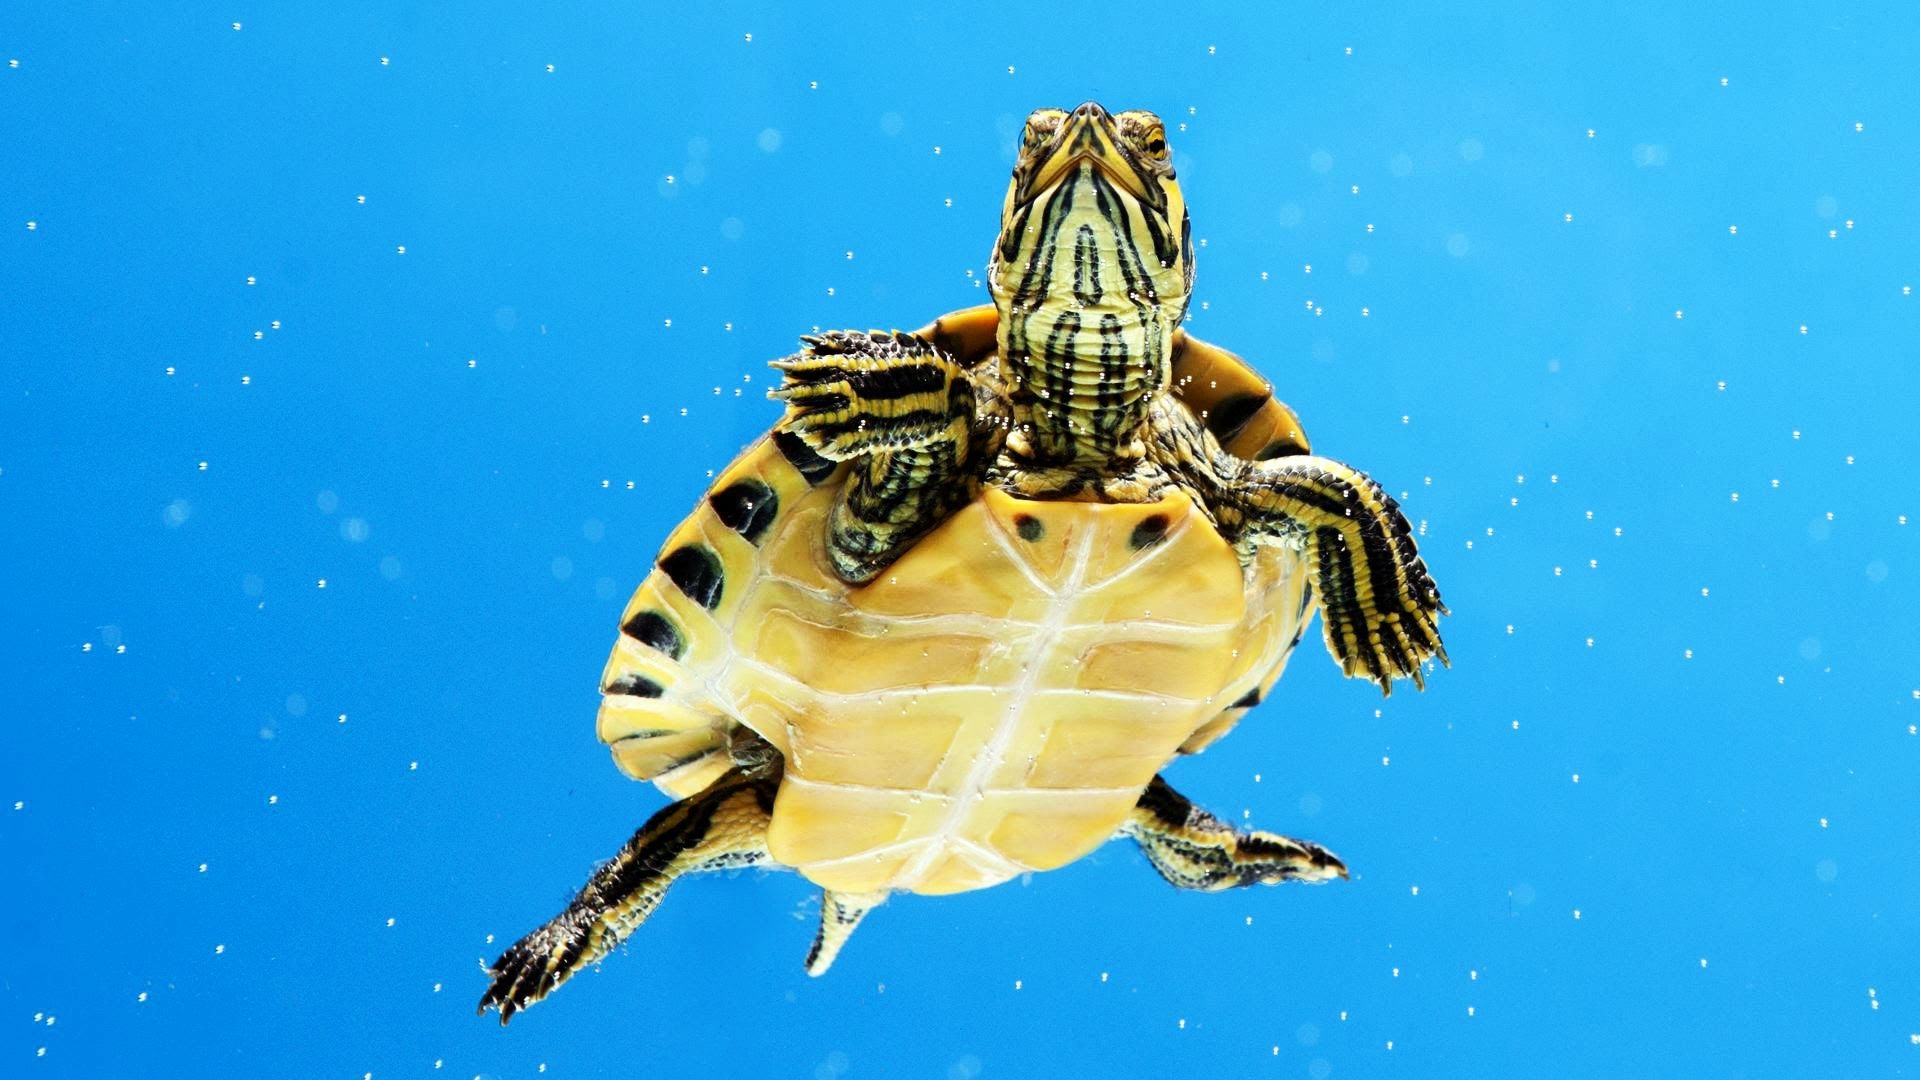 What's an Aquatic Turtle? | Pet Turtles - YouTube